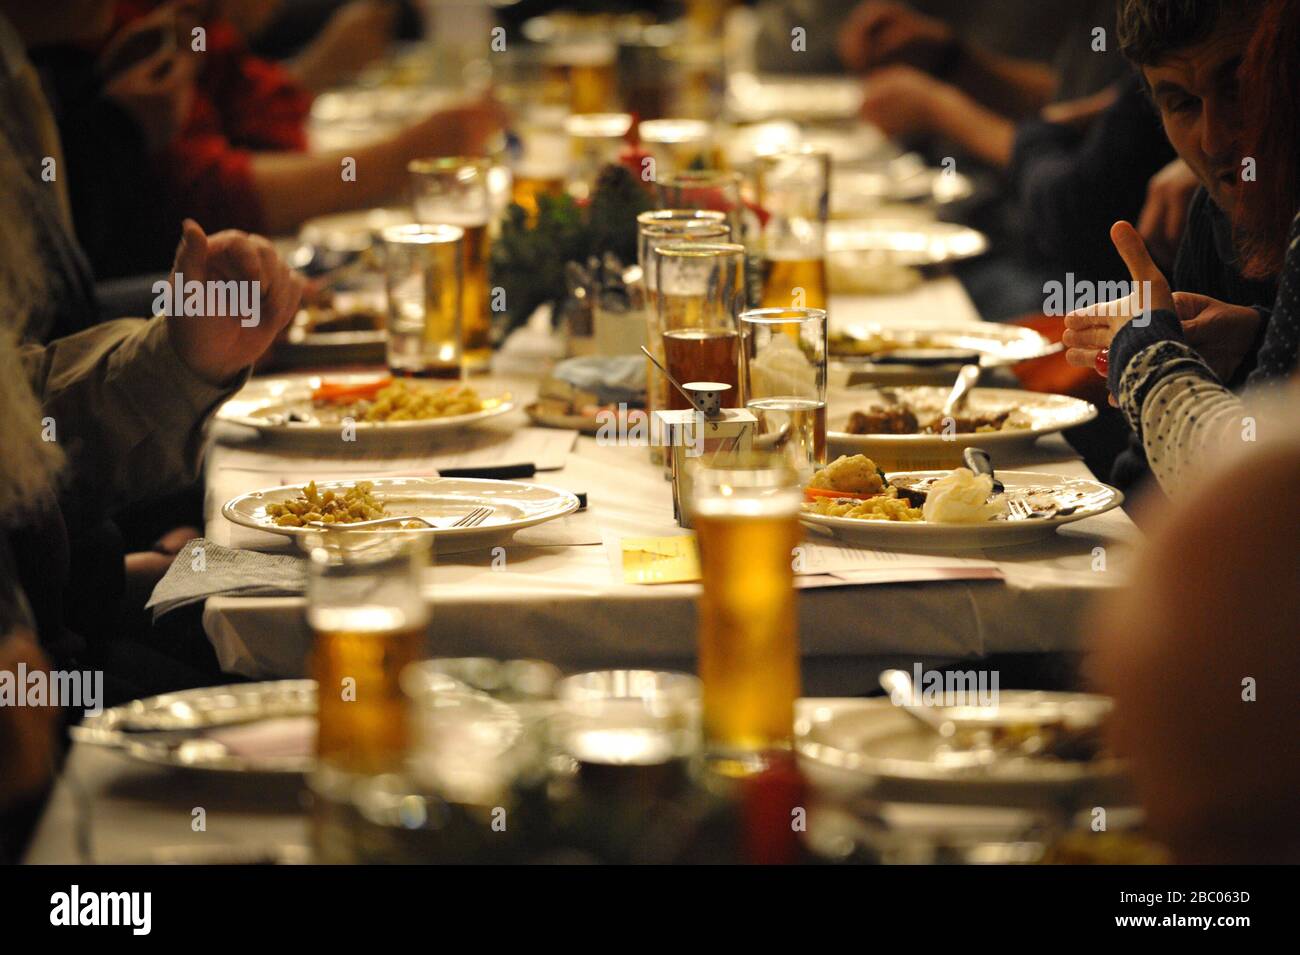 The Catholic Men's Welfare Association Munich e. V. (KMFV) has invited homeless and needy people to the Christmas party on Christmas Eve at the Munich Hofbräuhaus. [automated translation] Stock Photo